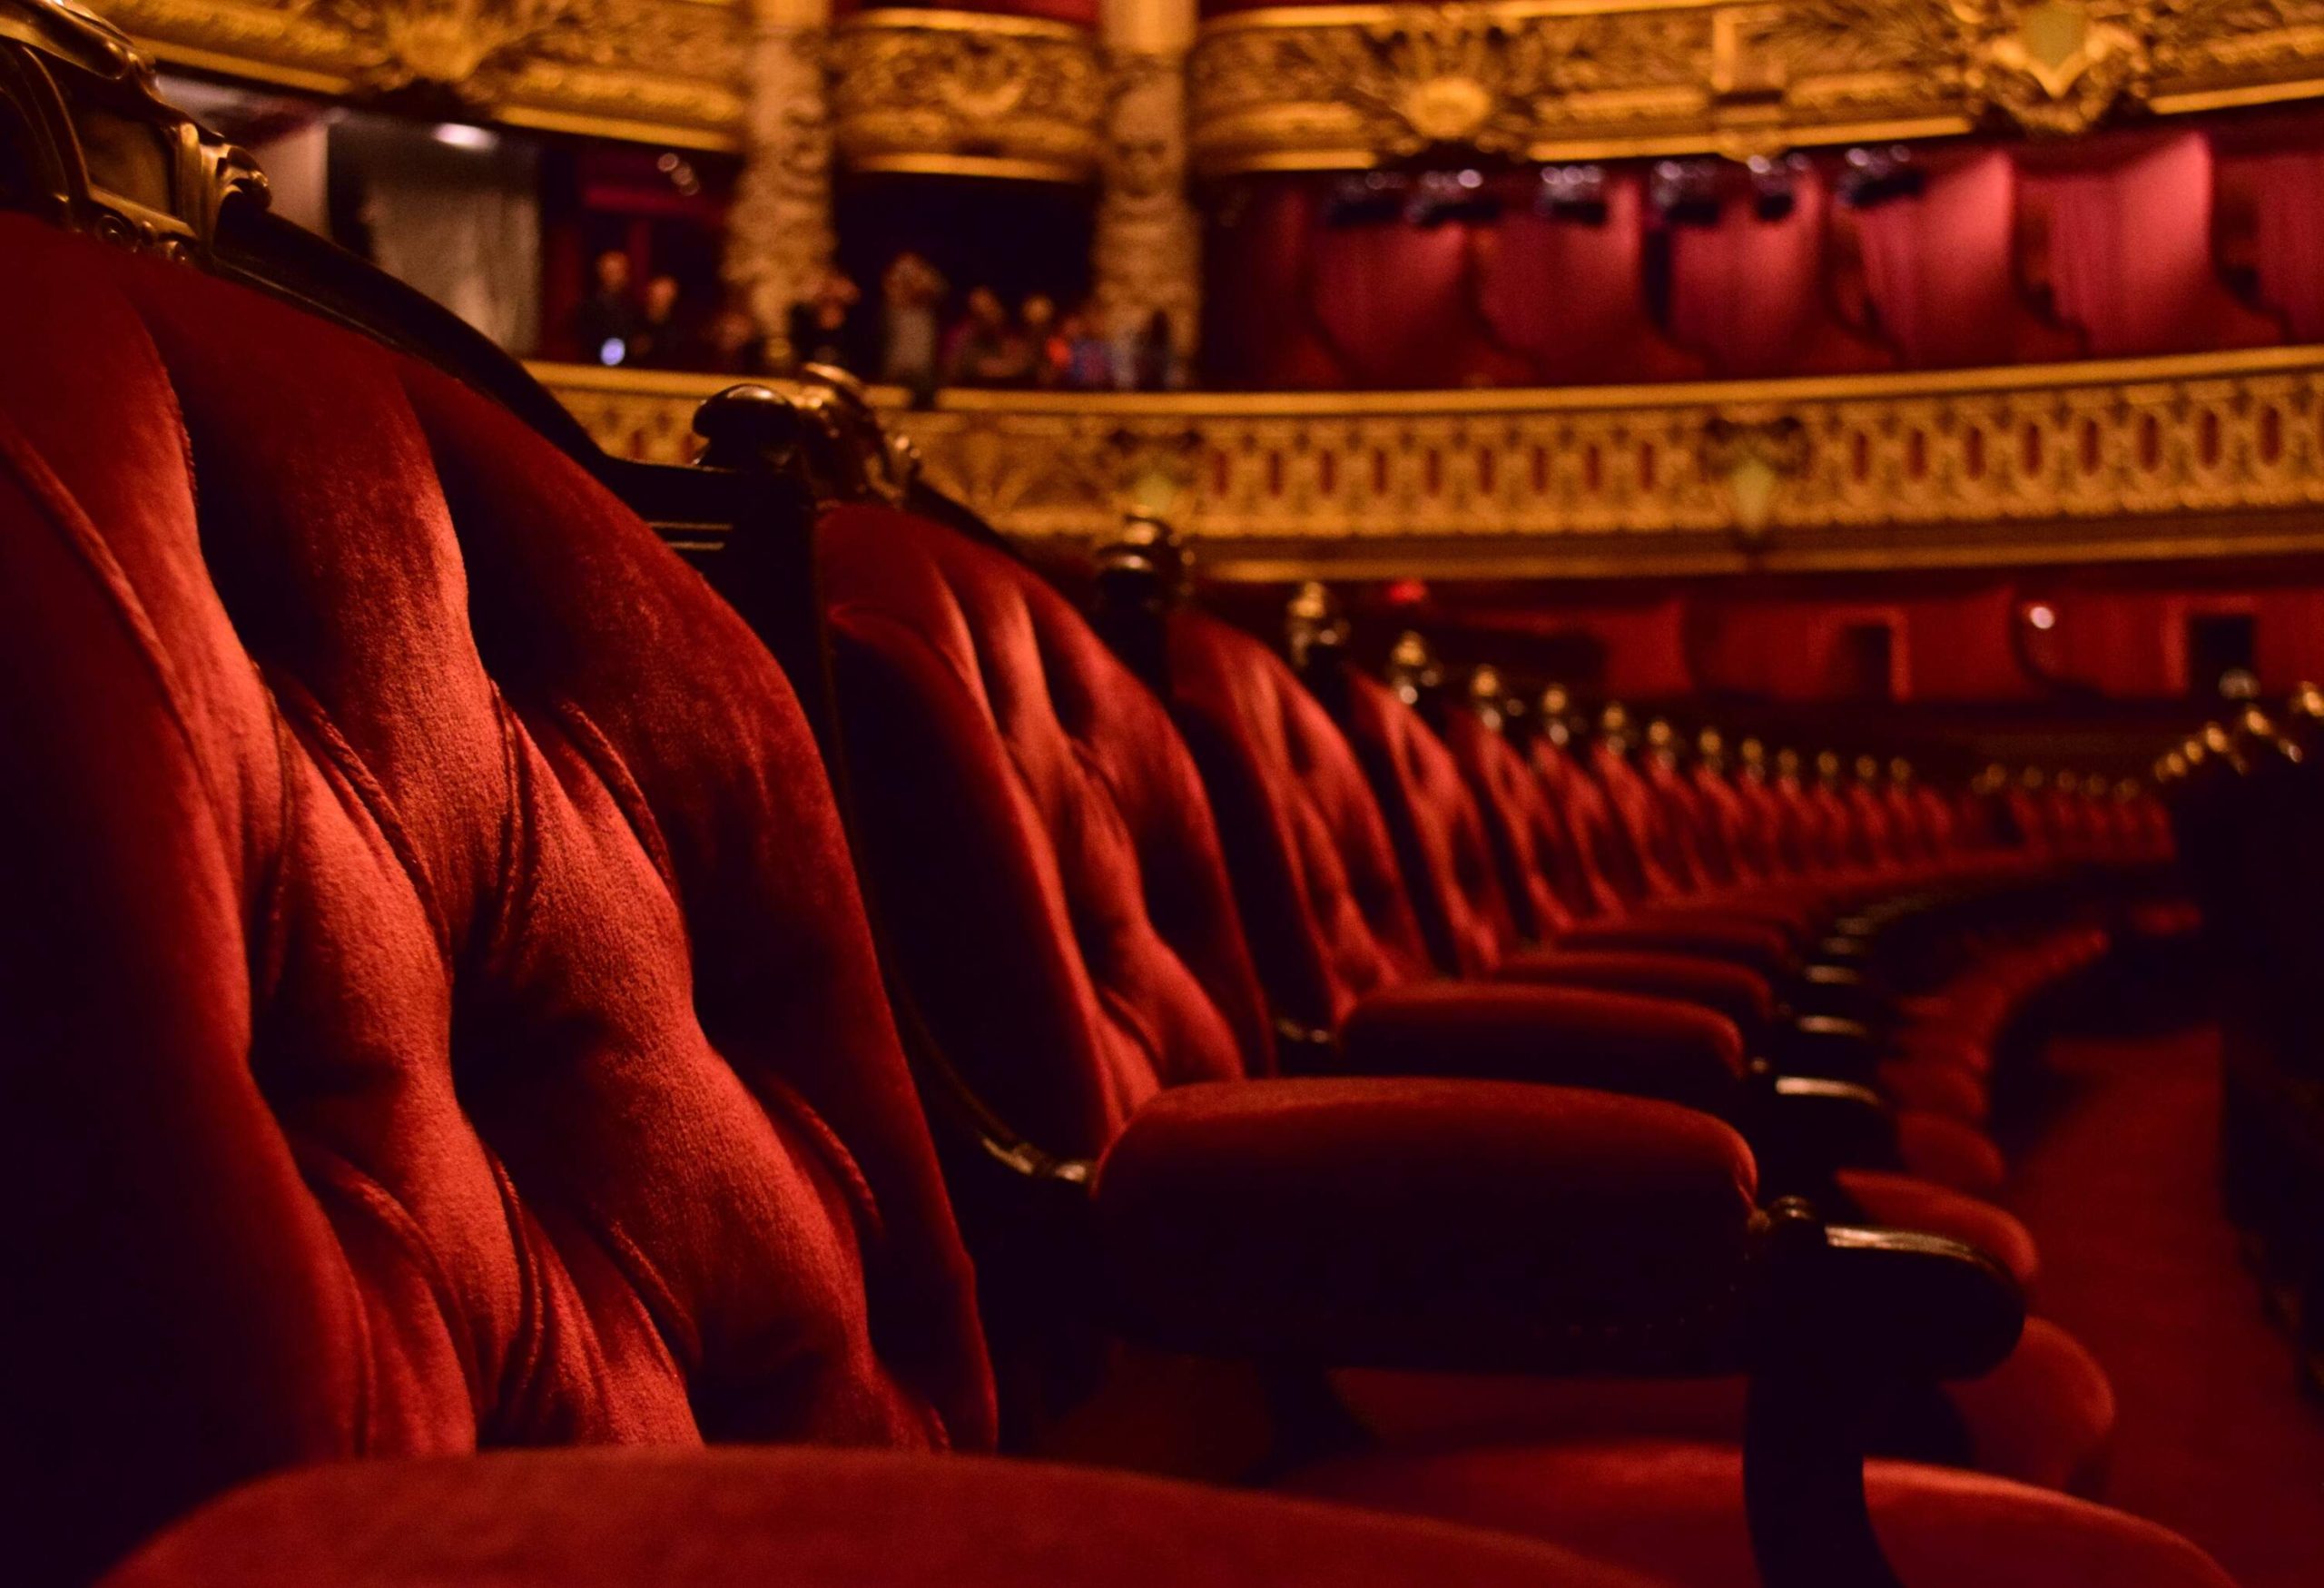 A row of theatre seats, upholstered in rich red fabric.